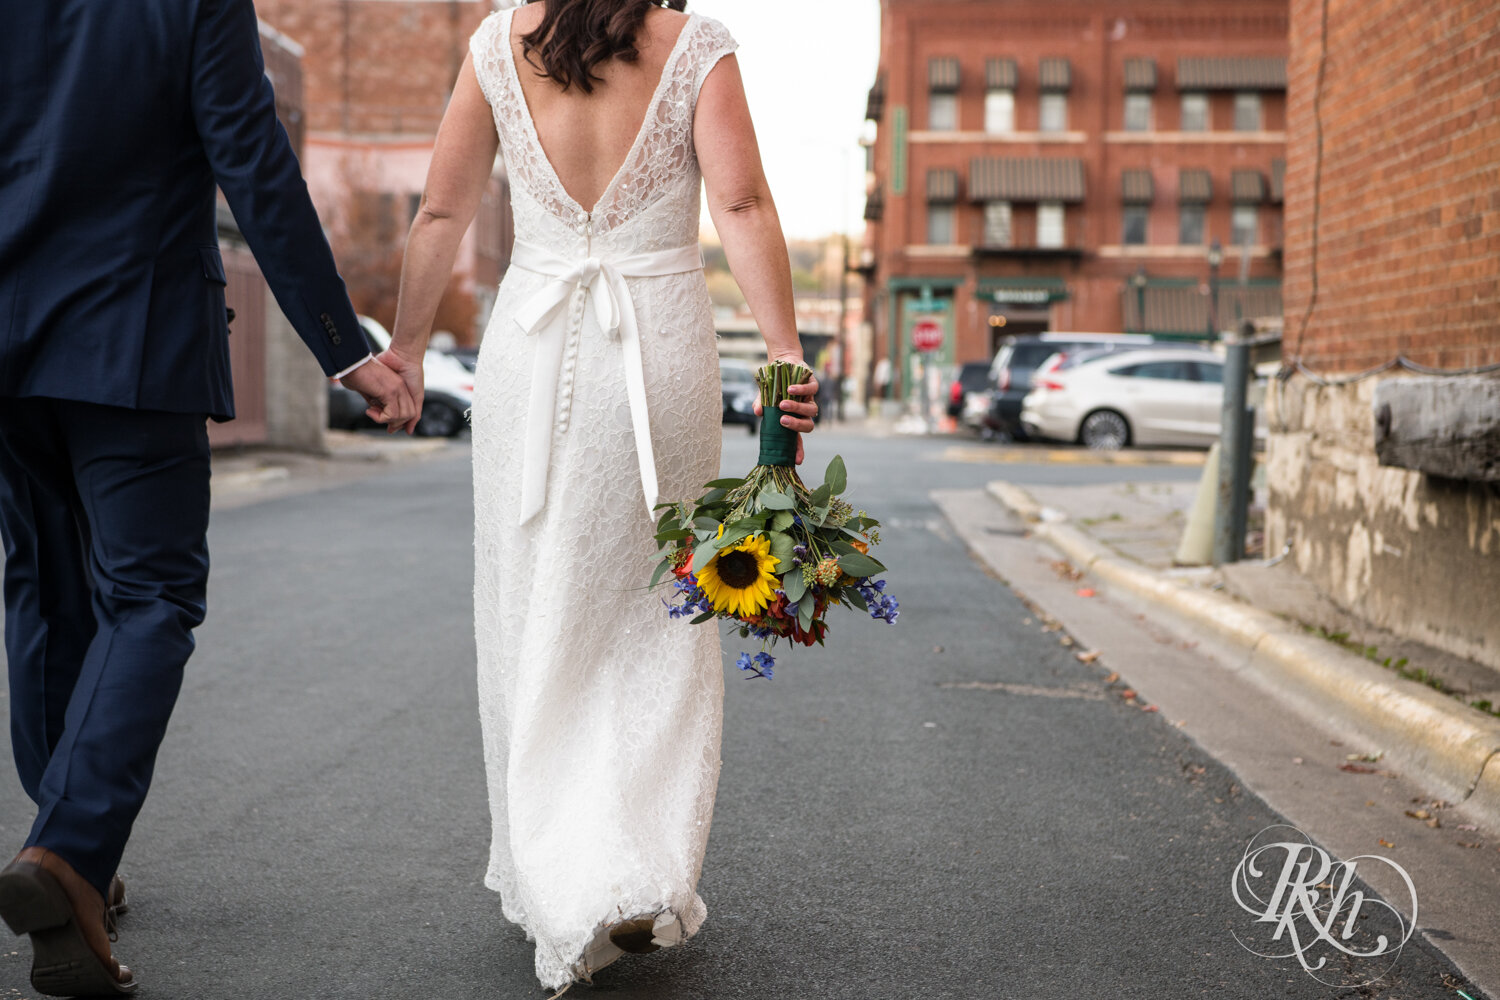 Bride and groom walk down city streets in Stillwater, Minnesota at sunset.